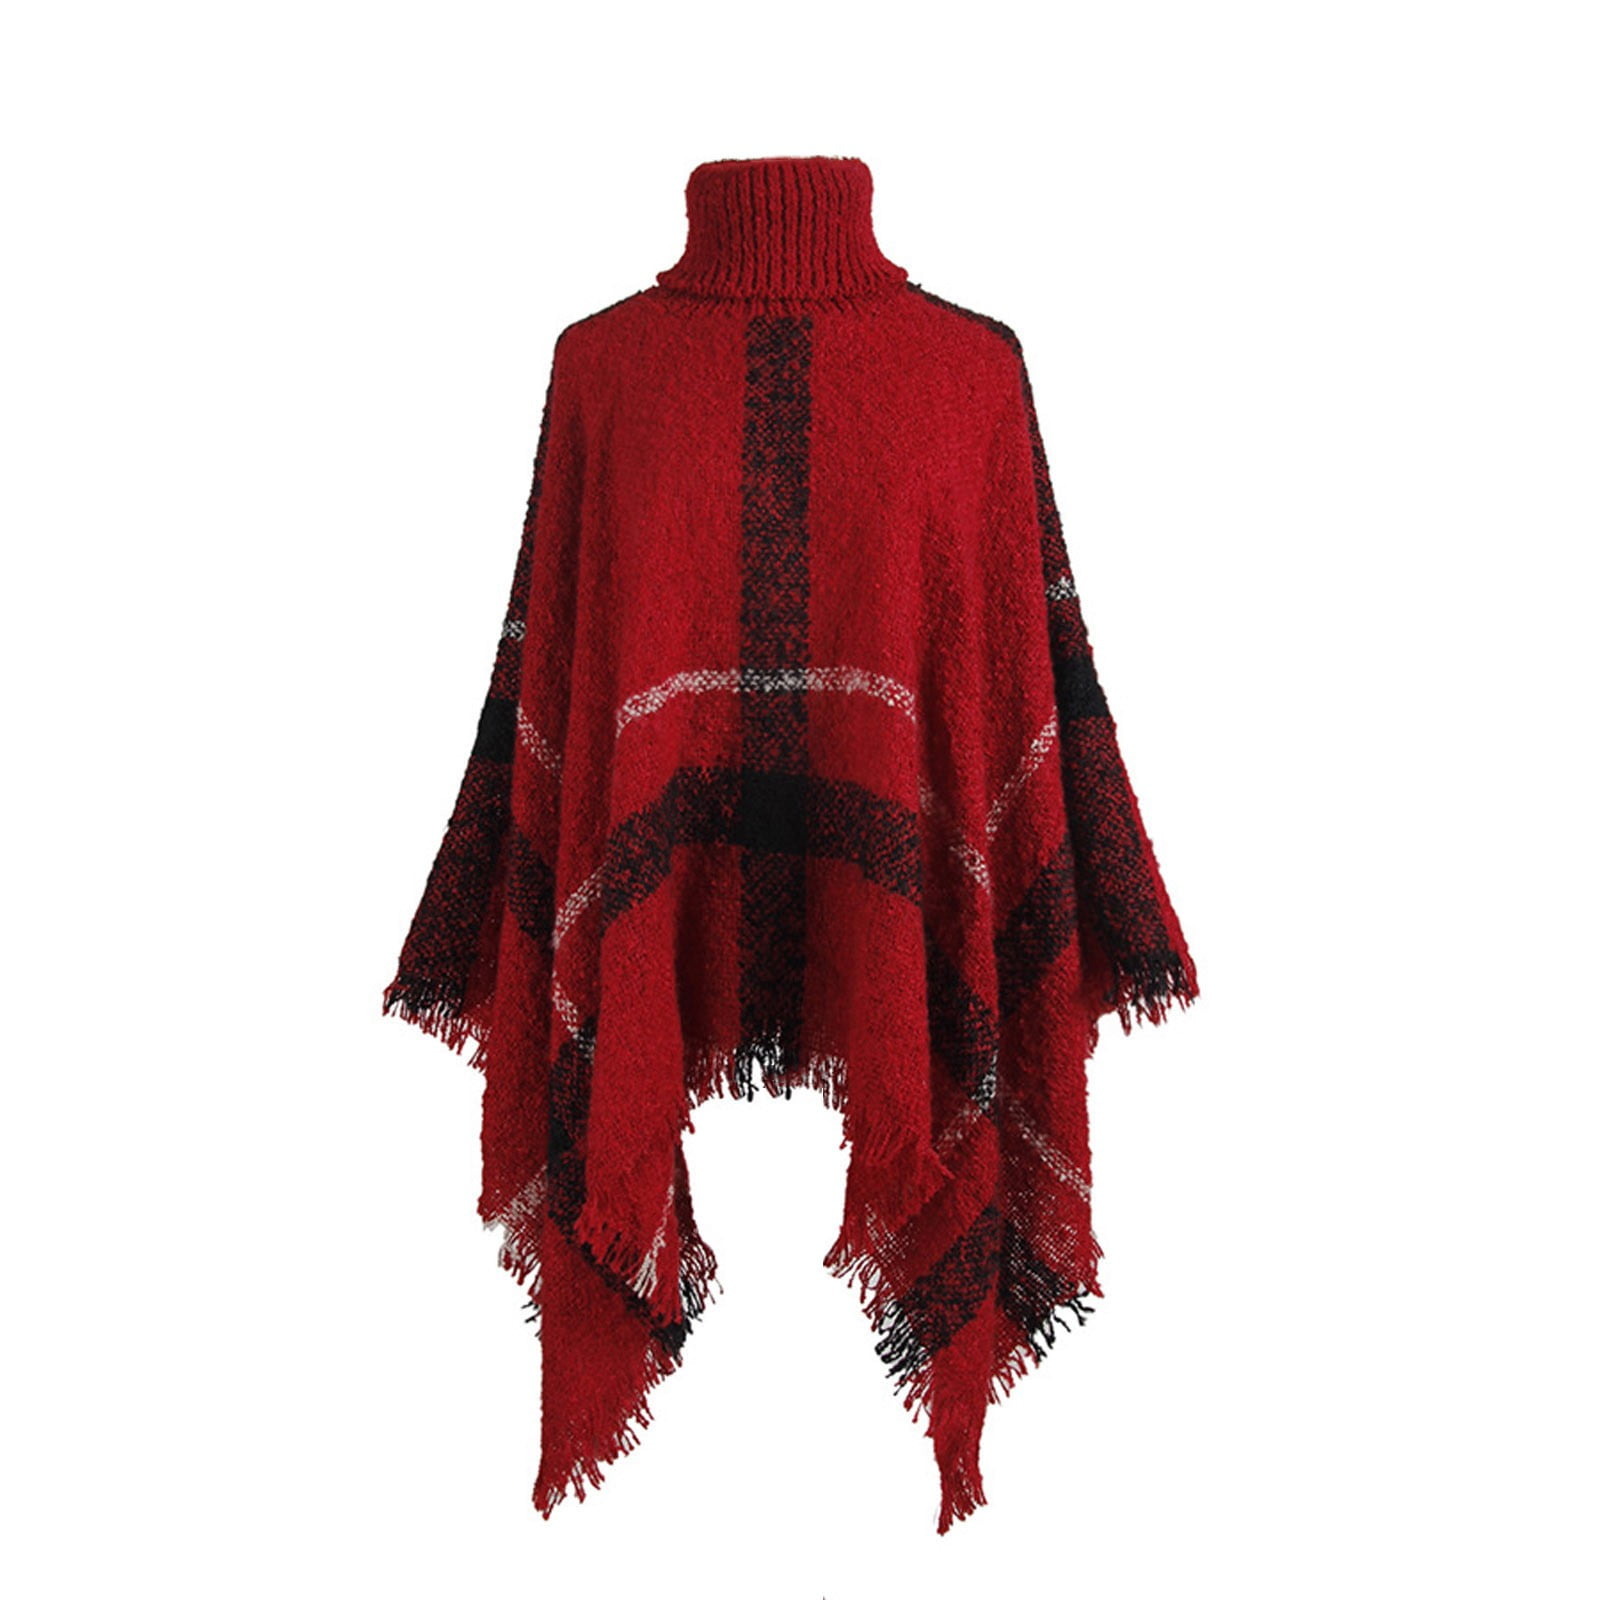 RYDCOT Pullover Poncho Shawl Cape Wraps for Women Shawl Warm Collar ...